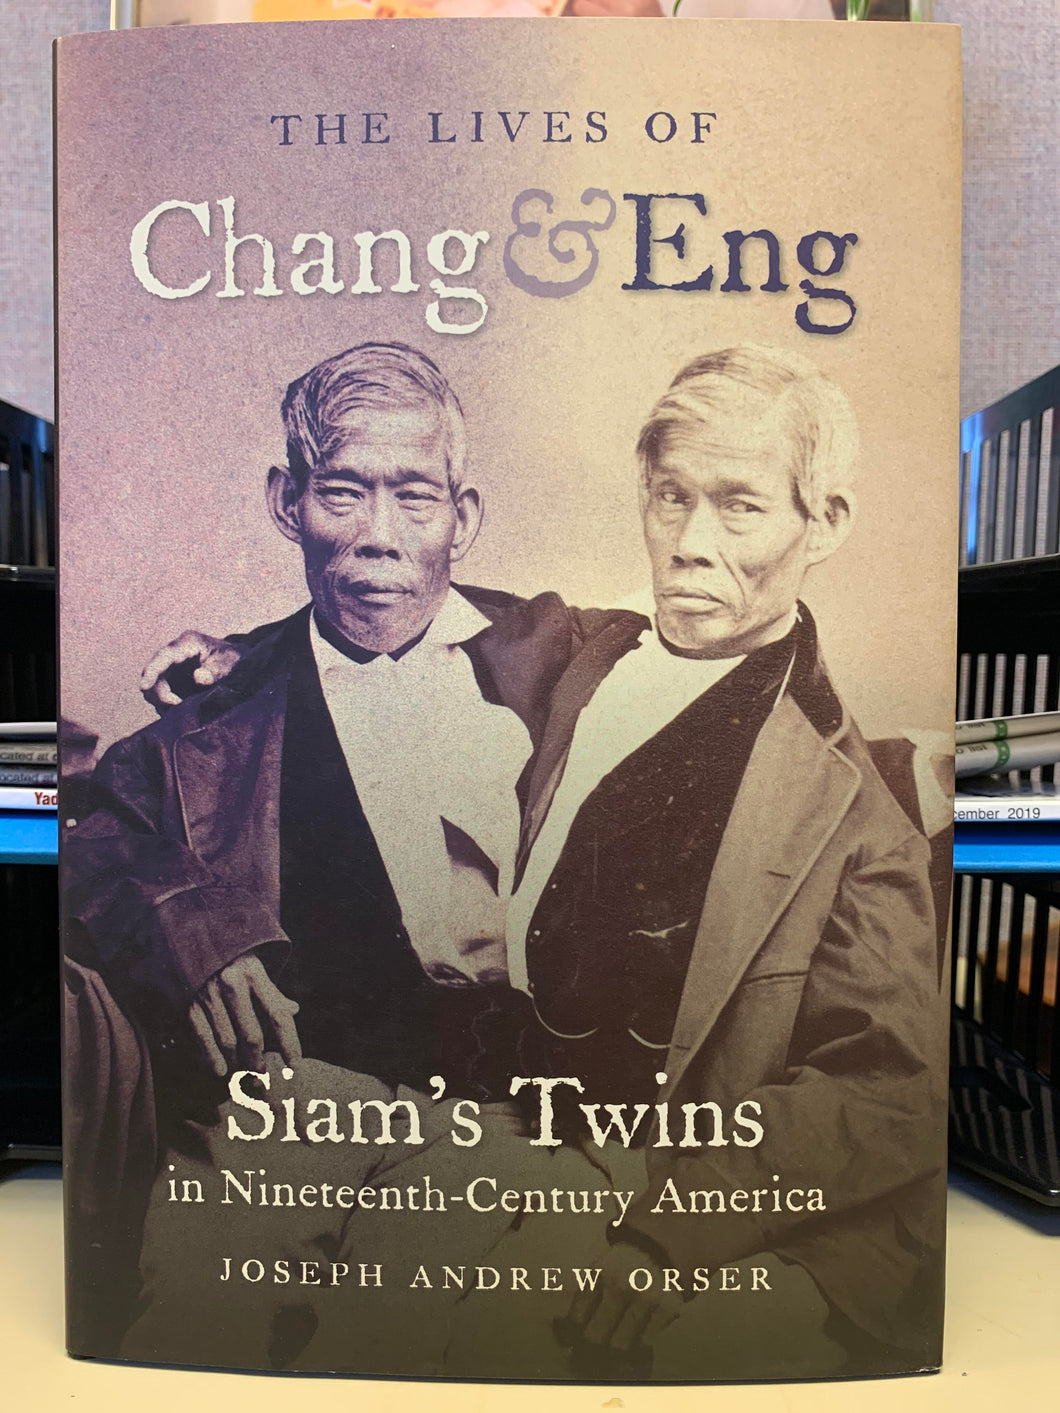 The Lives of Chang & Eng: Siam’s Twins in Nineteenth Century America by Joseph Andrew Orser